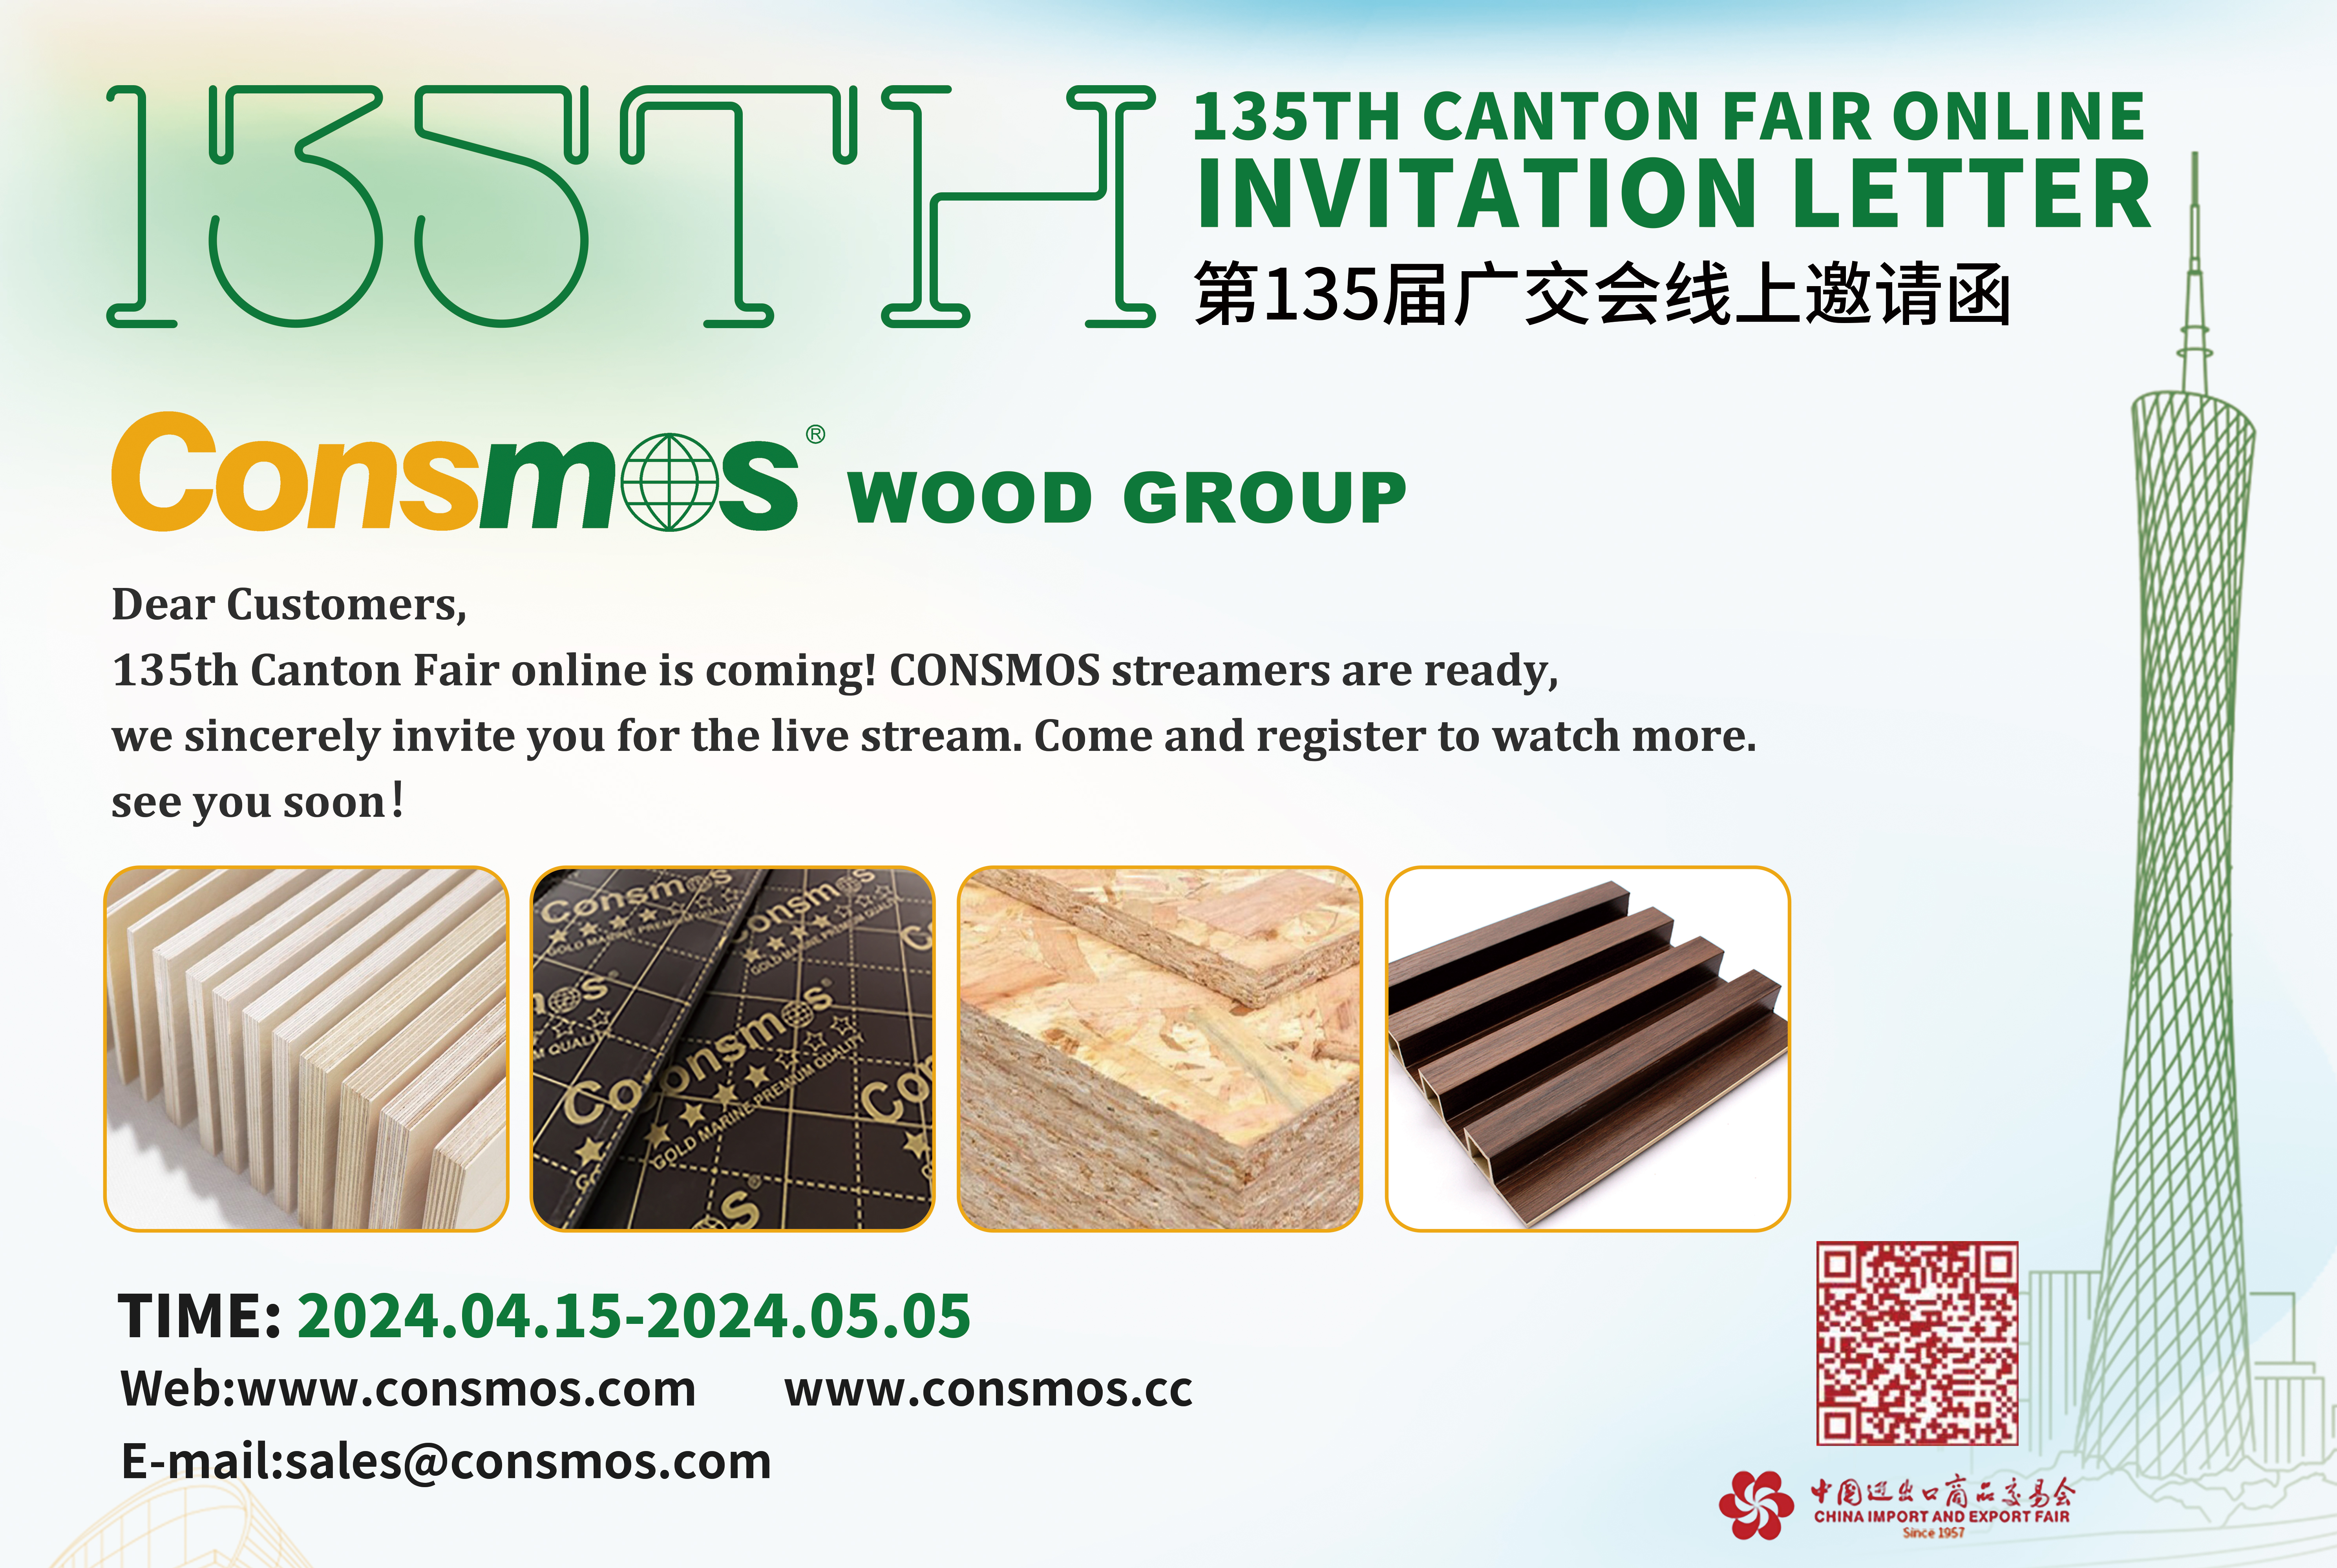 135TH CANTON FAIR ONLINE| WELCOME TO OUR LIVING SHOW